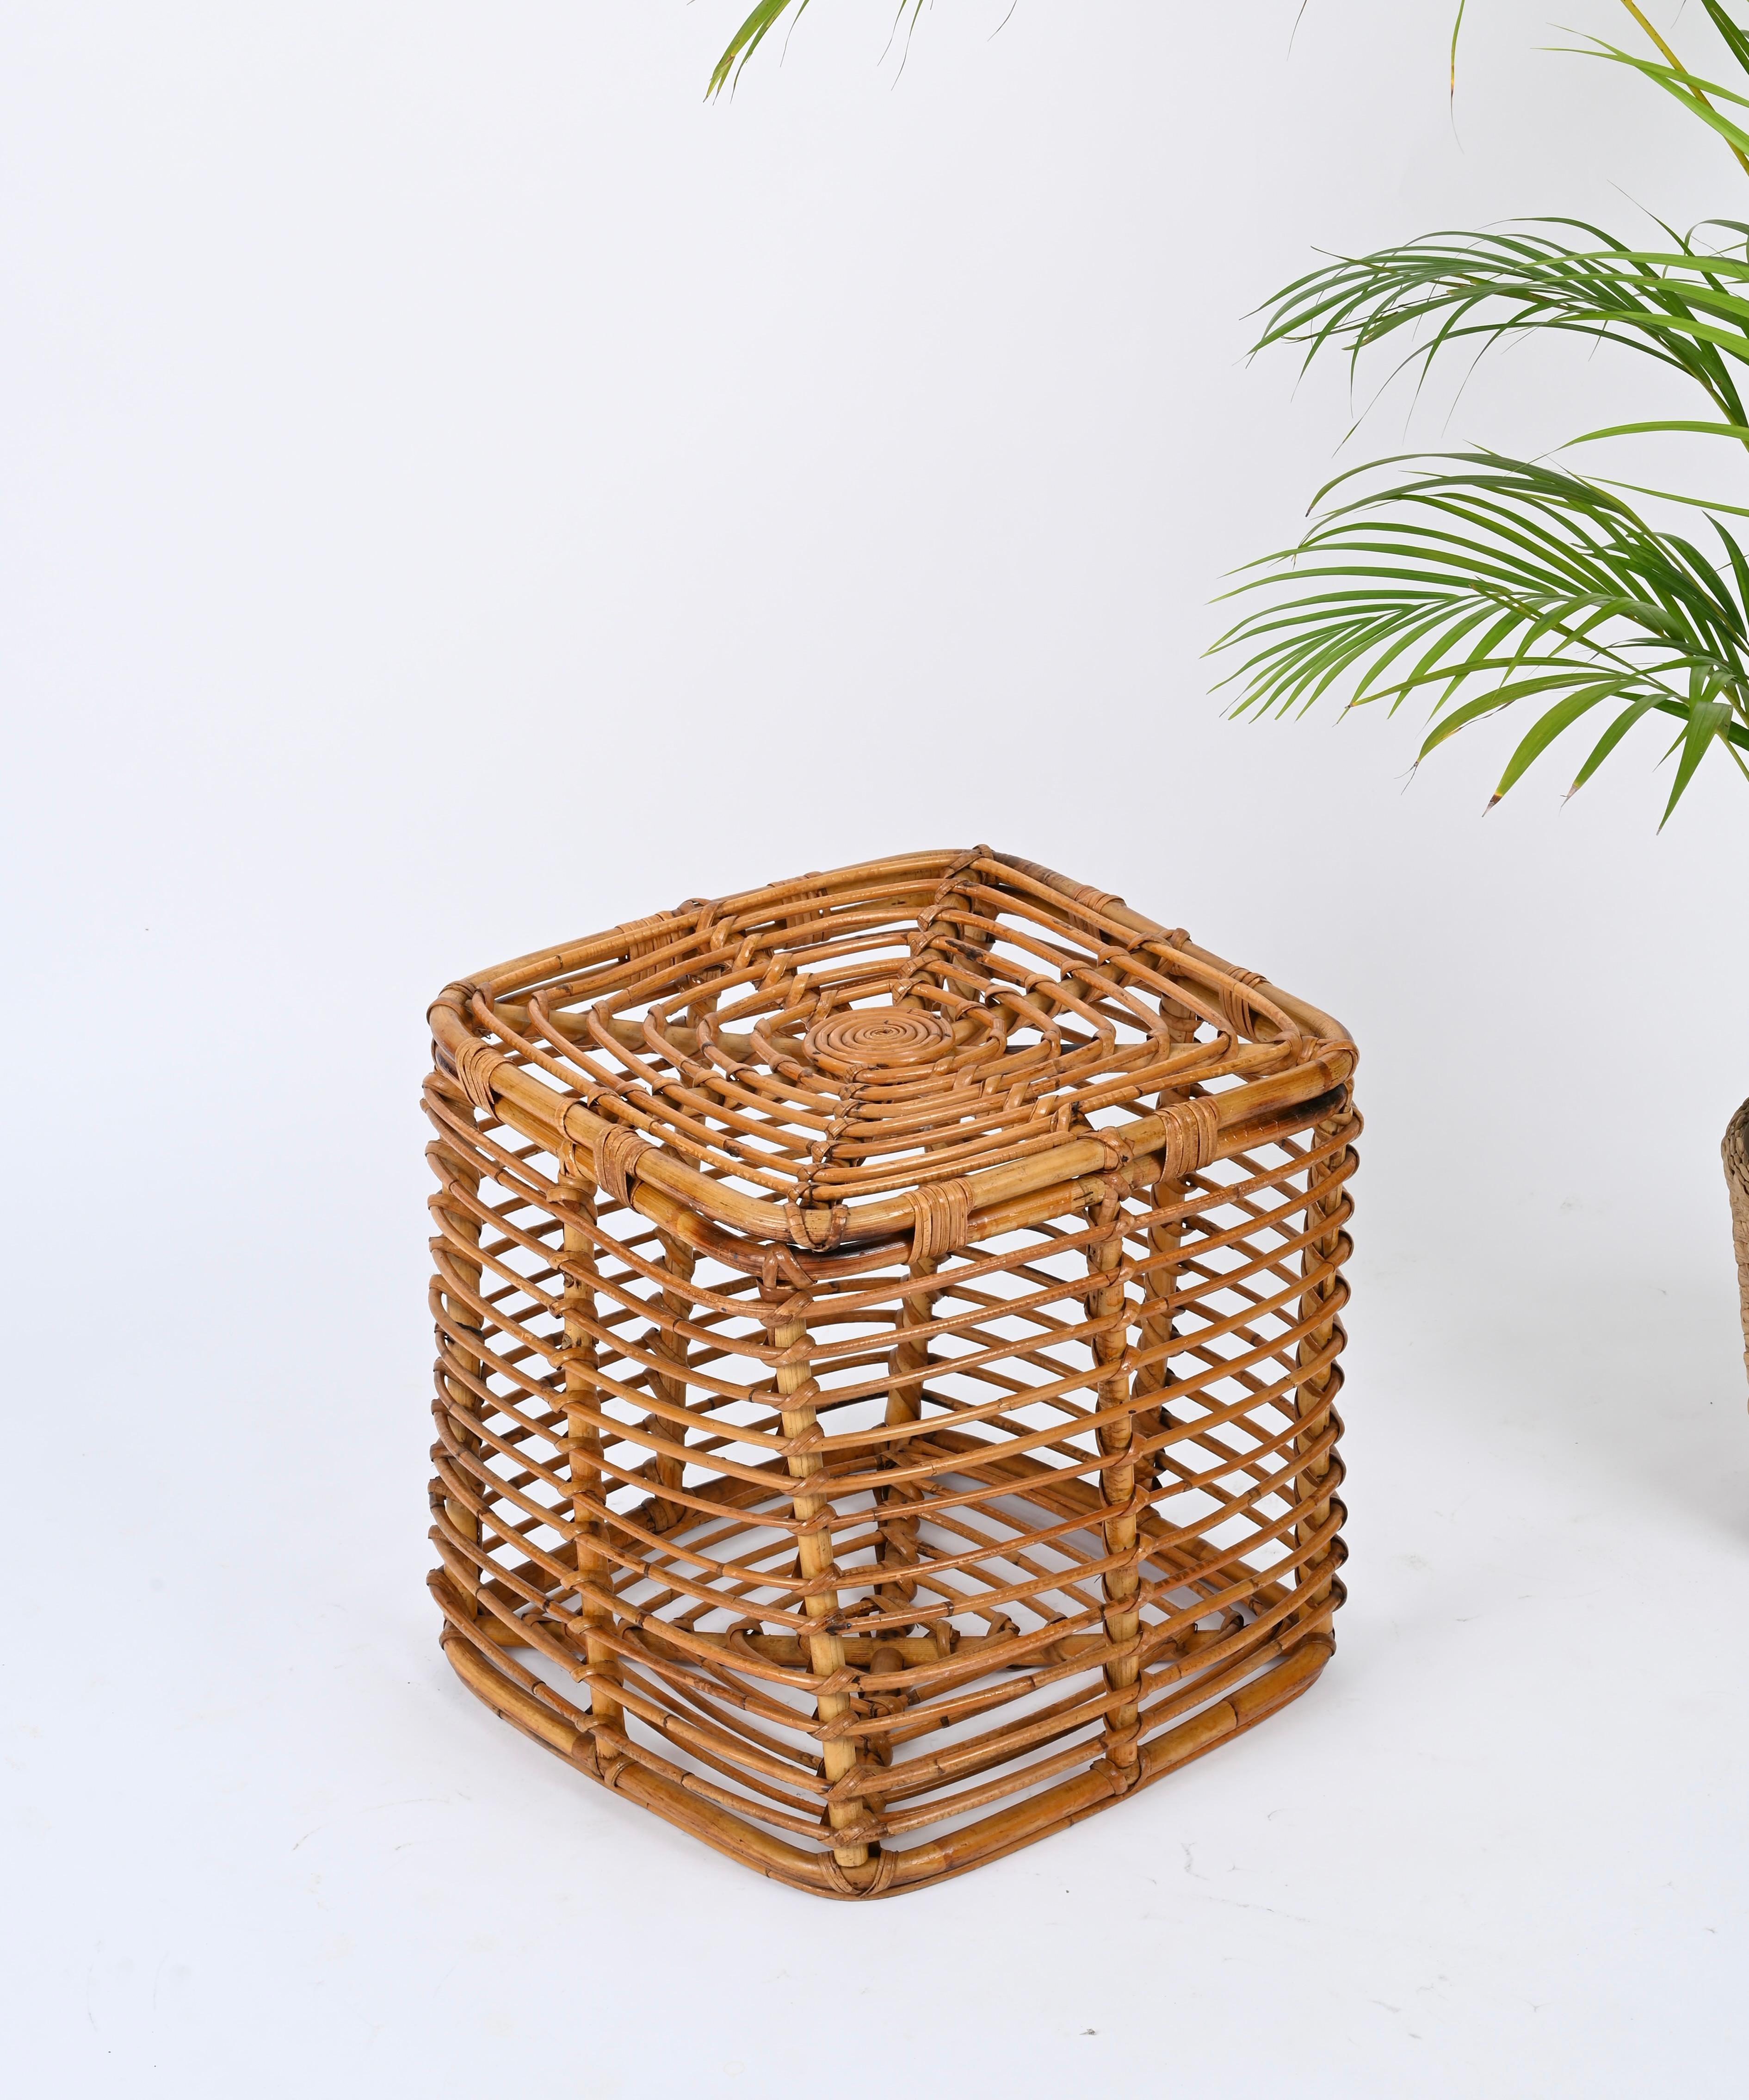 Midcentury Tito Agnoli Rattan and Wicker Square Pouf Stool, Italy, 1970s For Sale 4